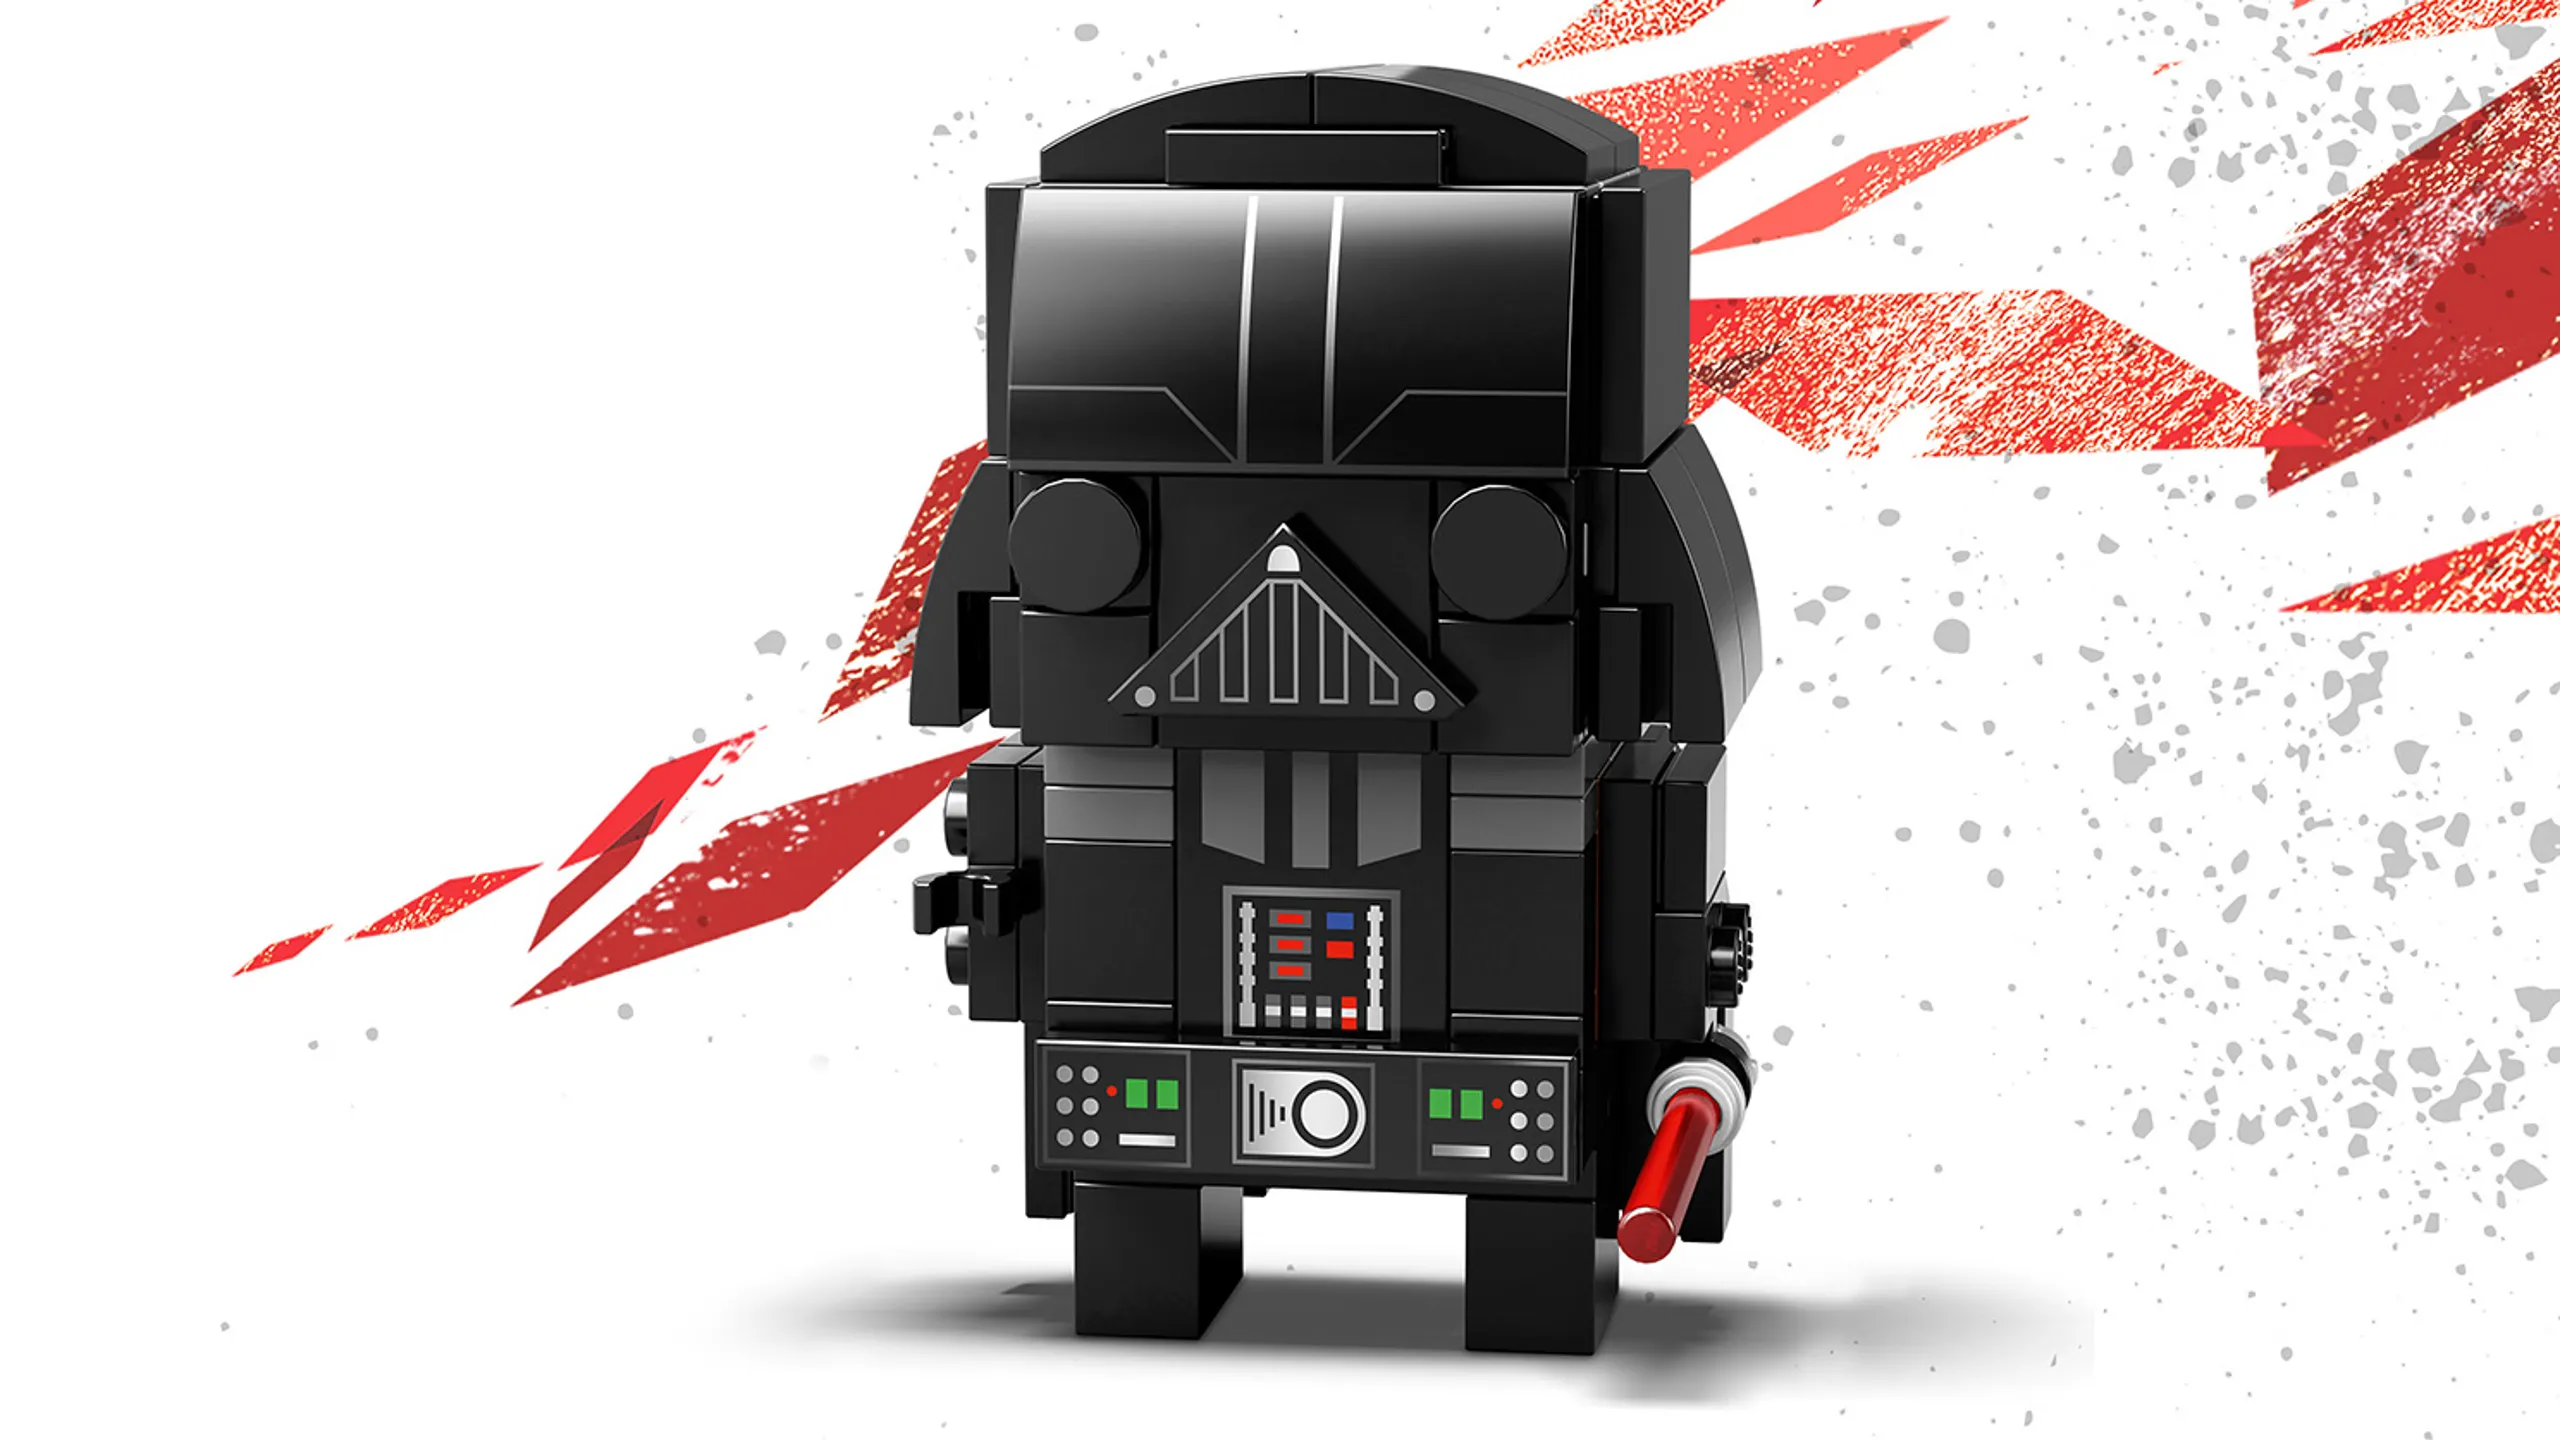 LEGO Brickheadz - 41619 Darth Vader - Build your own Darth Vader as the one in the movie Star Wars: Episode V The Empire Strikes Back.